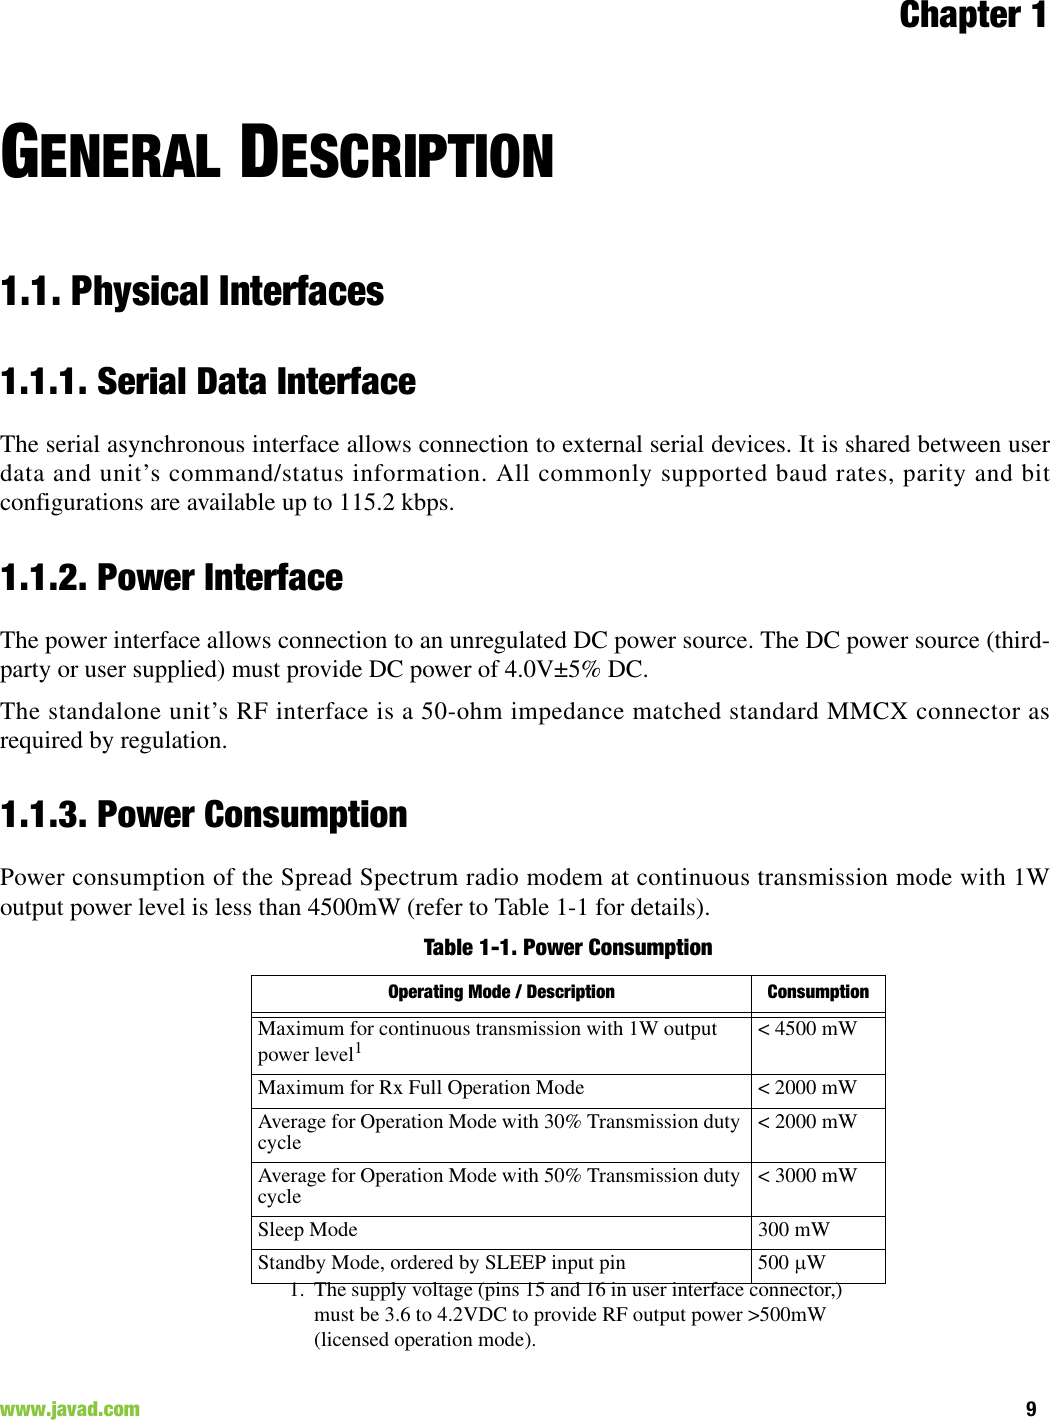 Chapter 19www.javad.com                                                                                                                                                        GENERAL DESCRIPTION1.1. Physical Interfaces1.1.1. Serial Data InterfaceThe serial asynchronous interface allows connection to external serial devices. It is shared between userdata and unit’s command/status information. All commonly supported baud rates, parity and bitconfigurations are available up to 115.2 kbps.1.1.2. Power InterfaceThe power interface allows connection to an unregulated DC power source. The DC power source (third-party or user supplied) must provide DC power of 4.0V±5% DC. The standalone unit’s RF interface is a 50-ohm impedance matched standard MMCX connector asrequired by regulation.1.1.3. Power ConsumptionPower consumption of the Spread Spectrum radio modem at continuous transmission mode with 1Woutput power level is less than 4500mW (refer to Table 1-1 for details).Table 1-1. Power ConsumptionOperating Mode / Description  ConsumptionMaximum for continuous transmission with 1W output power level1 1. The supply voltage (pins 15 and 16 in user interface connector,) must be 3.6 to 4.2VDC to provide RF output power &gt;500mW (licensed operation mode).&lt; 4500 mWMaximum for Rx Full Operation Mode &lt; 2000 mWAverage for Operation Mode with 30% Transmission duty cycle  &lt; 2000 mWAverage for Operation Mode with 50% Transmission duty cycle  &lt; 3000 mWSleep Mode  300 mWStandby Mode, ordered by SLEEP input pin  500 W